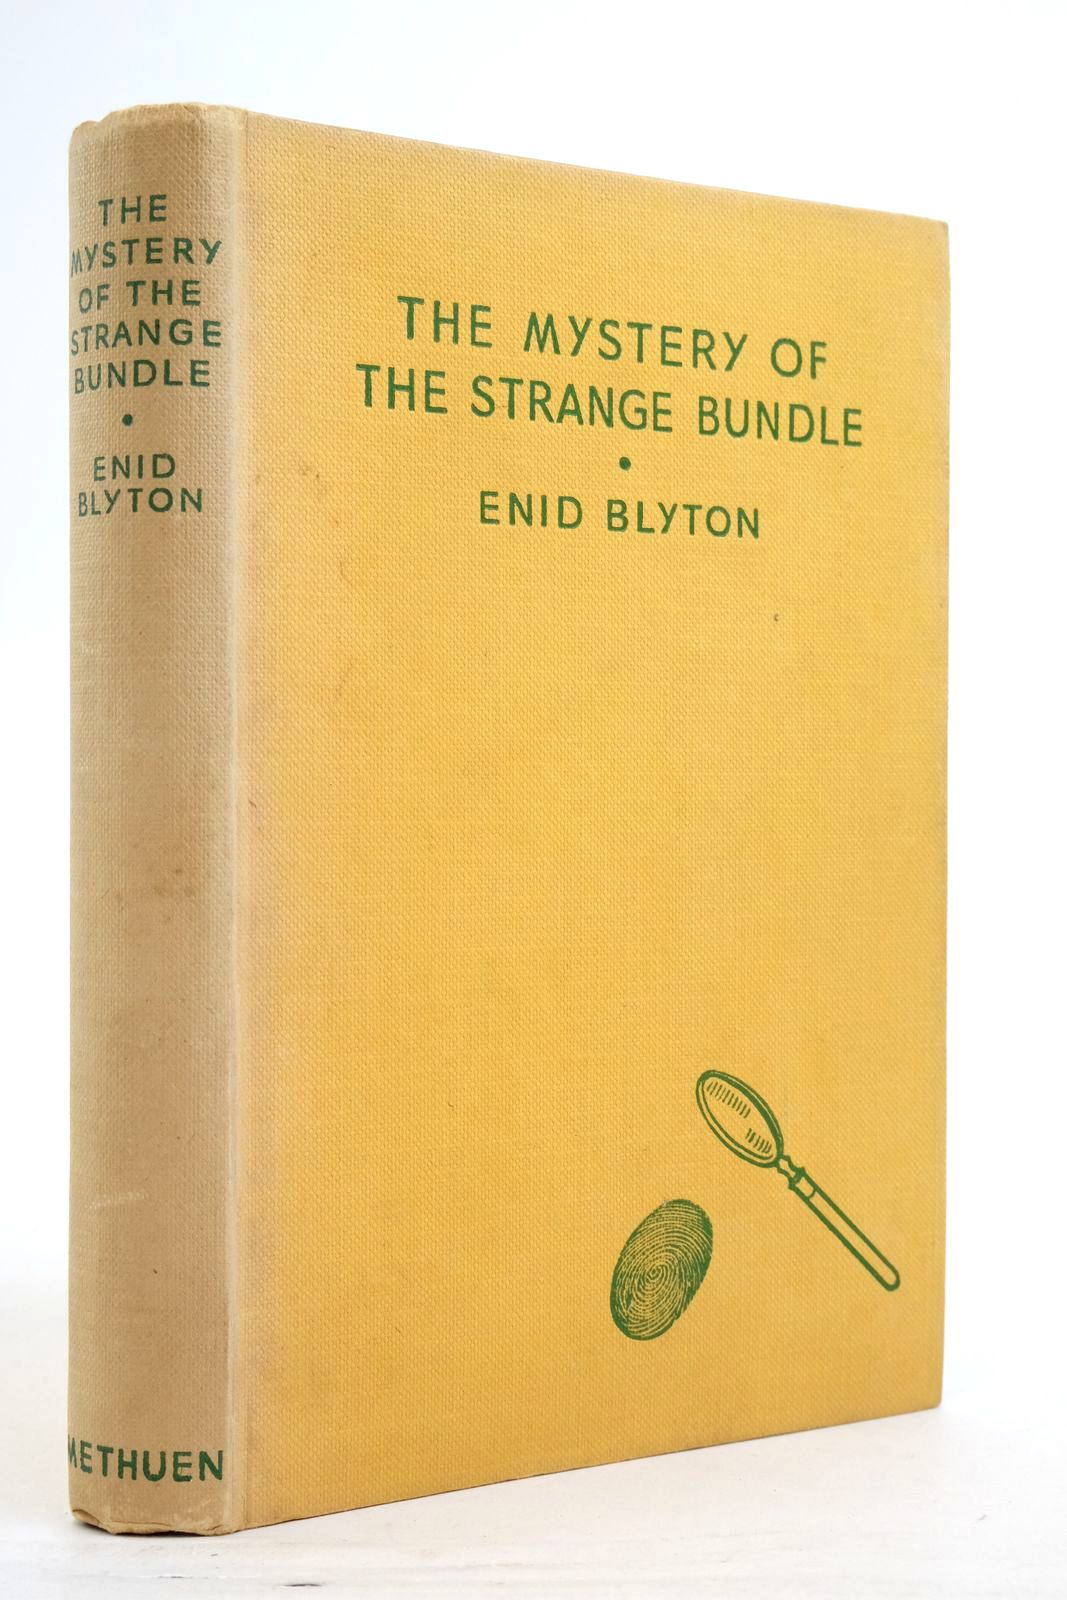 Photo of THE MYSTERY OF THE STRANGE BUNDLE written by Blyton, Enid illustrated by Evans, Treyer published by Methuen & Co. Ltd. (STOCK CODE: 2137022)  for sale by Stella & Rose's Books